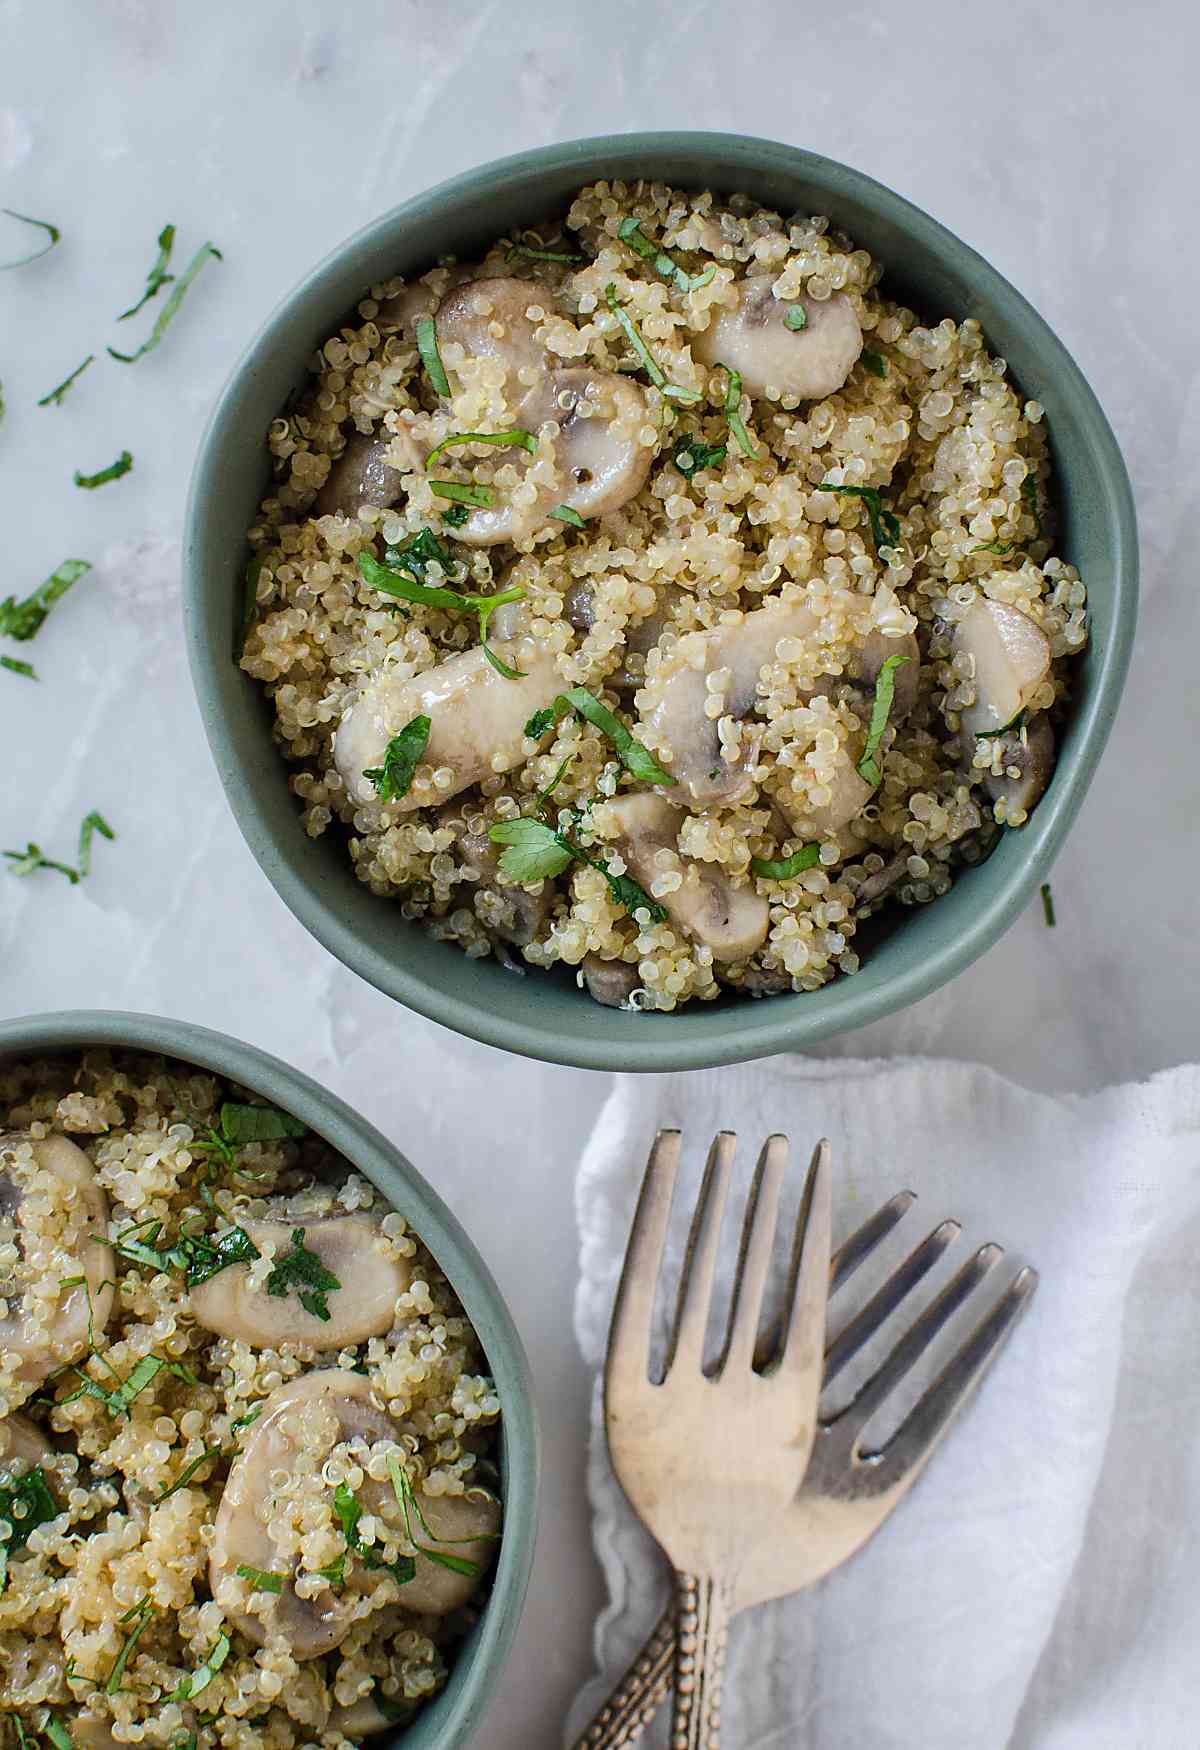 healthy garlic mushroom quinoa served in a serving bowls with metal forks on the side.